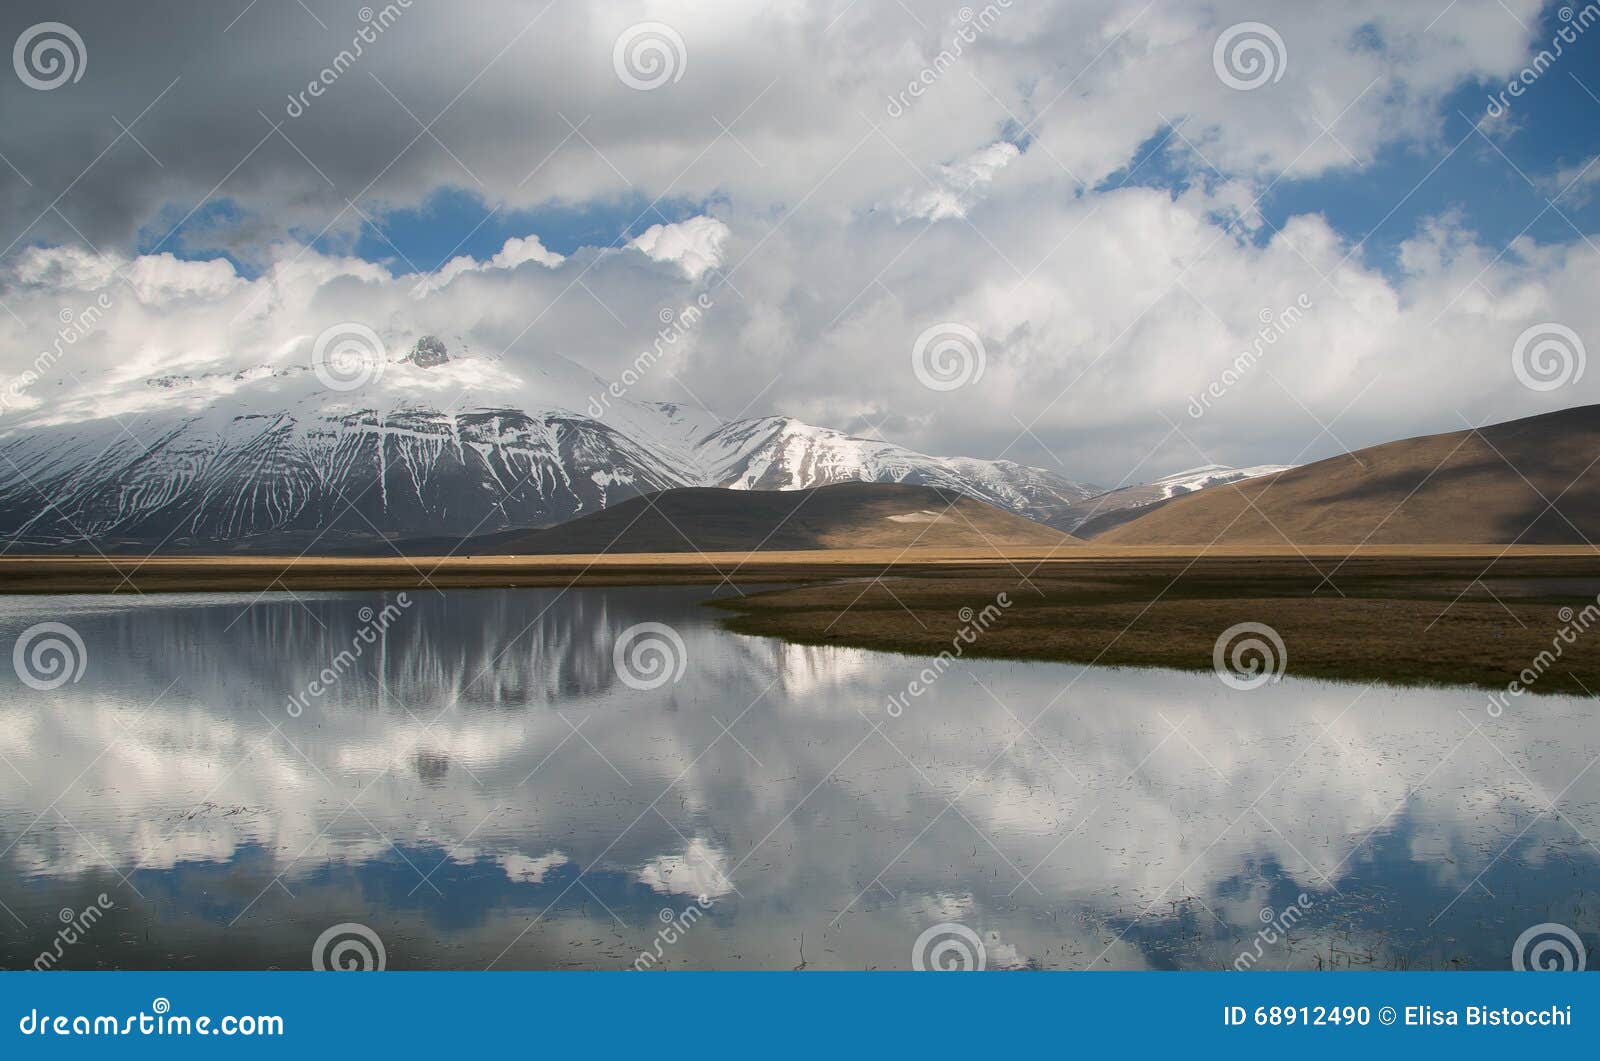 sibillini mountains reflected in the water in umbria